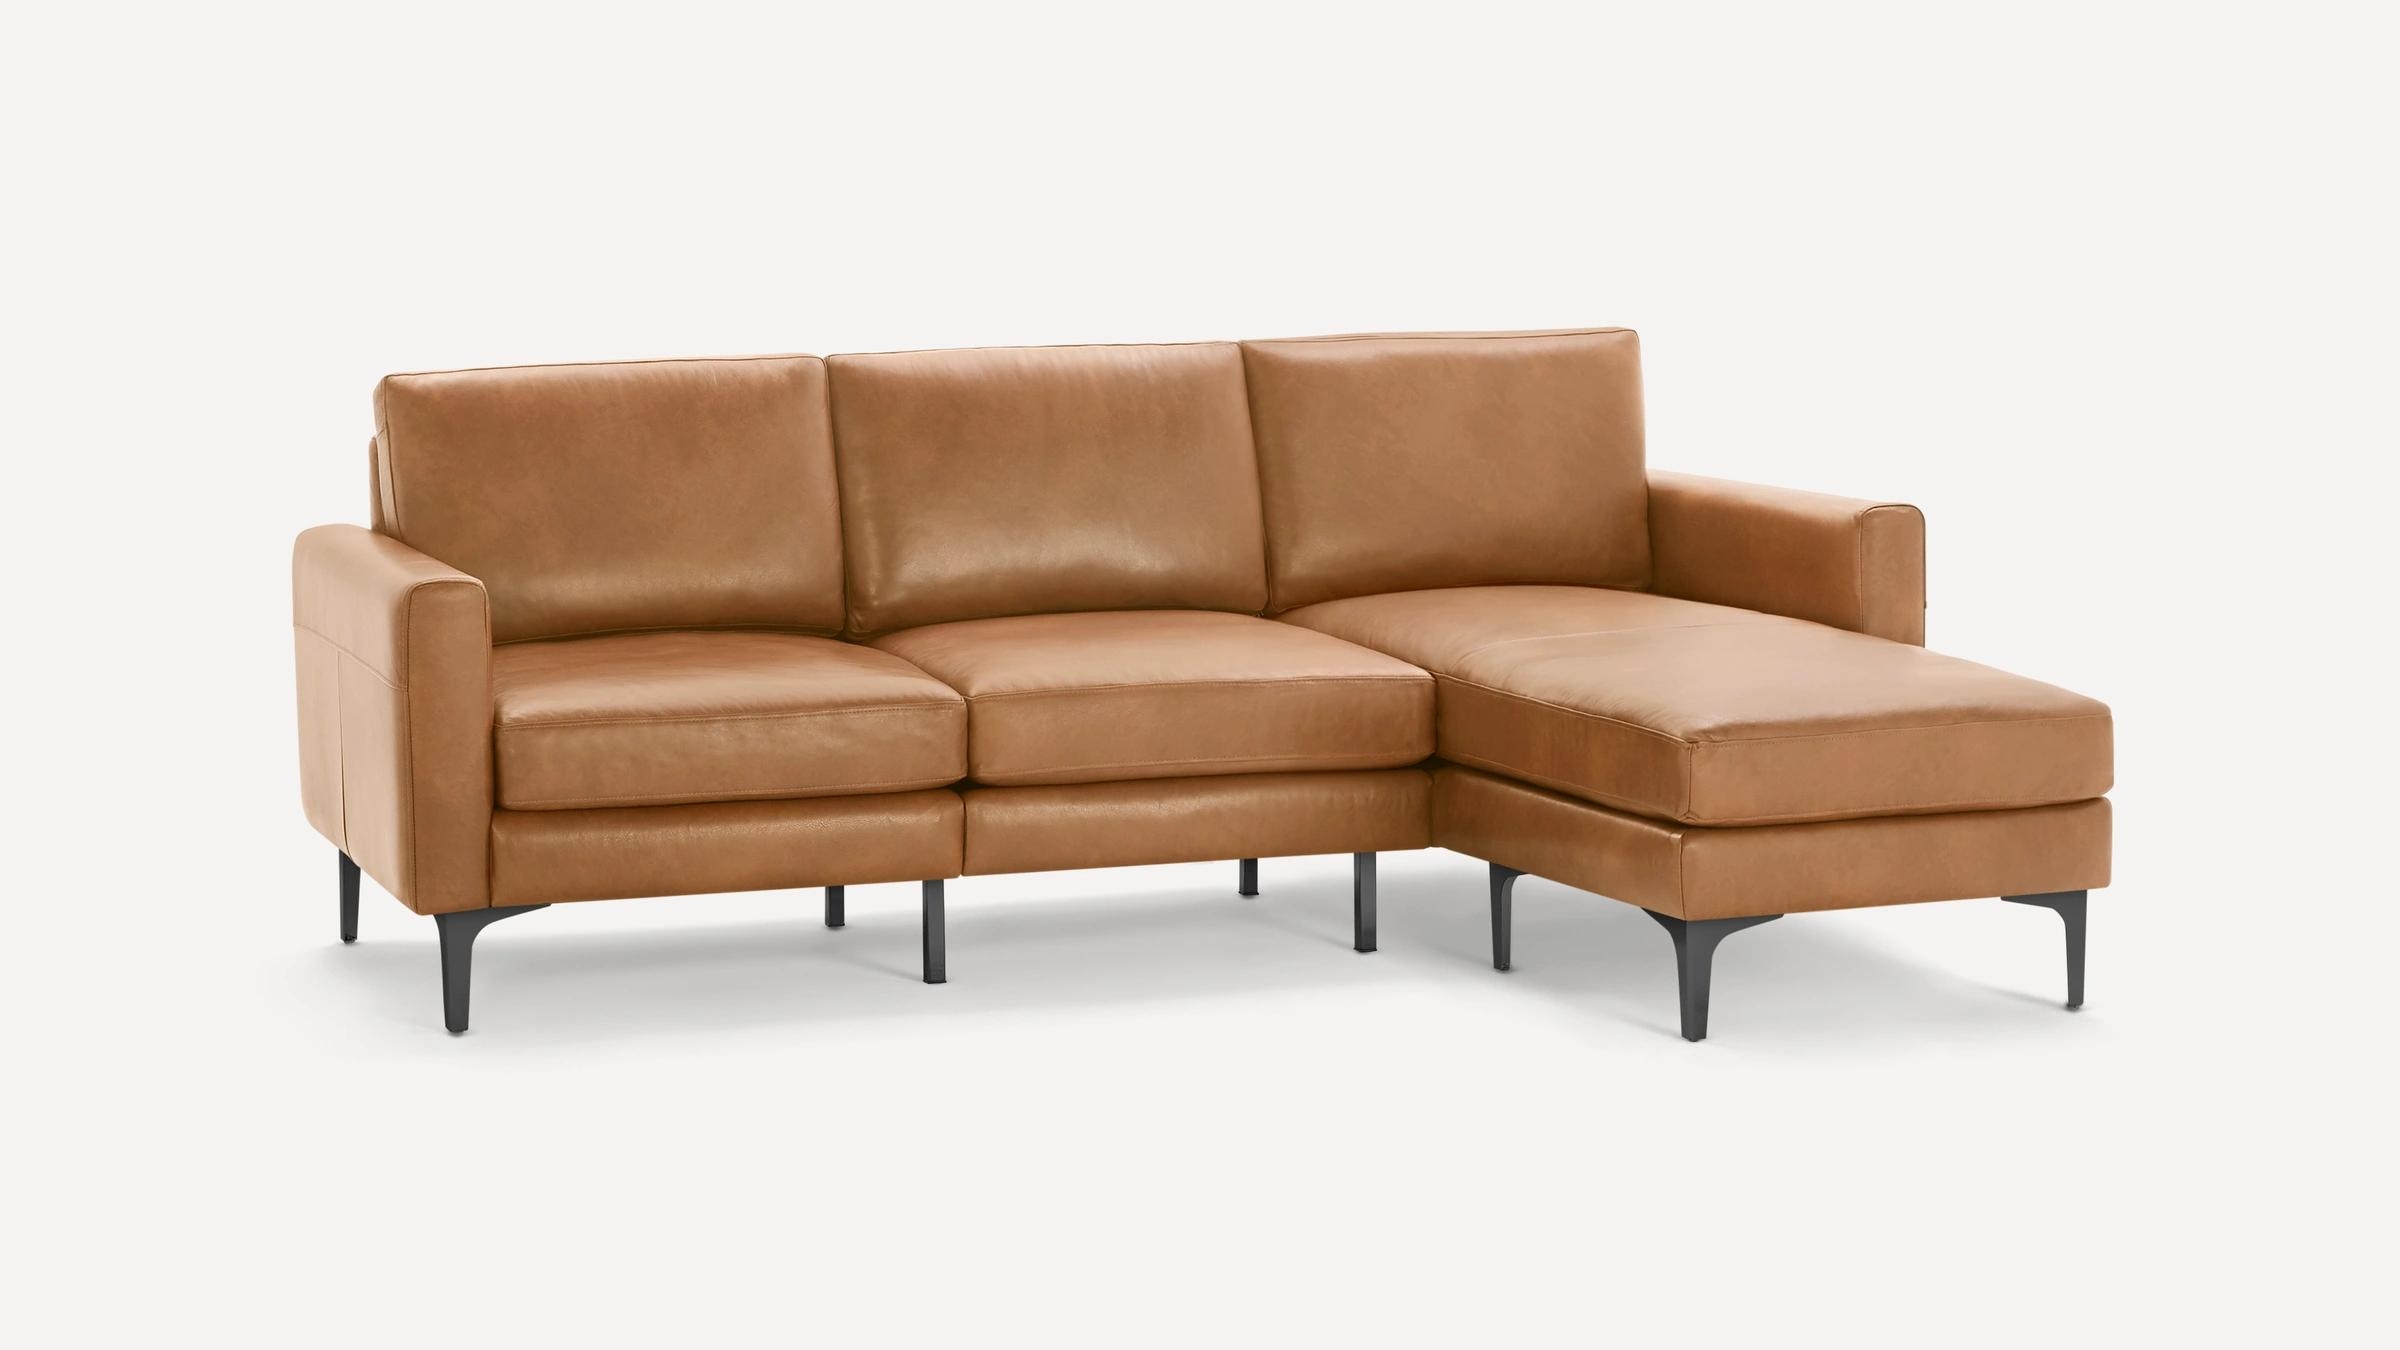 Nomad Leather Sectional in Camel, Black Metal Legs - Image 0